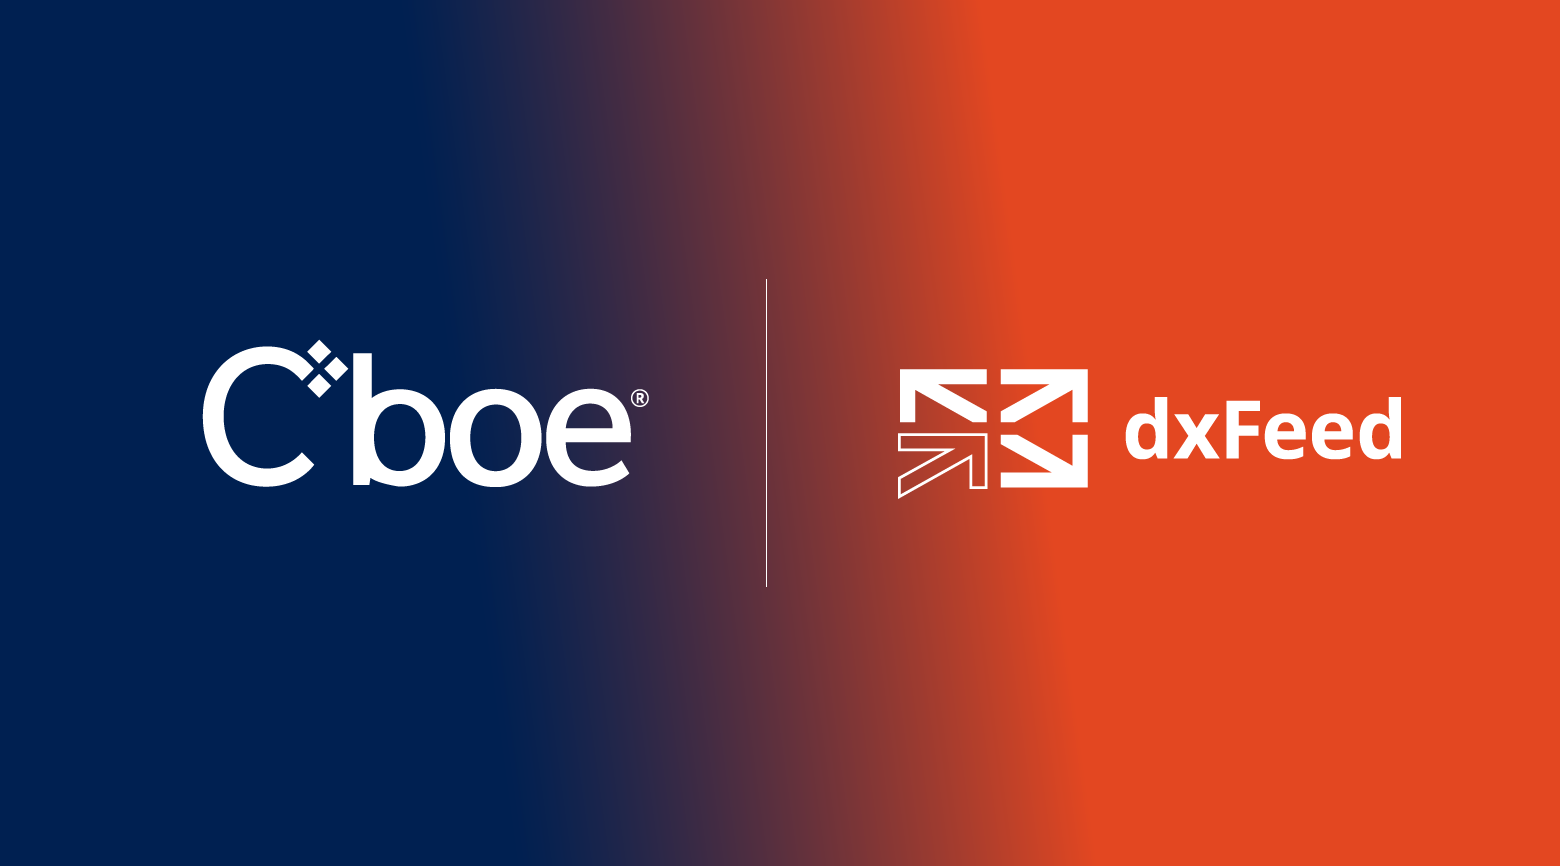 Cboe and dxFeed partnership